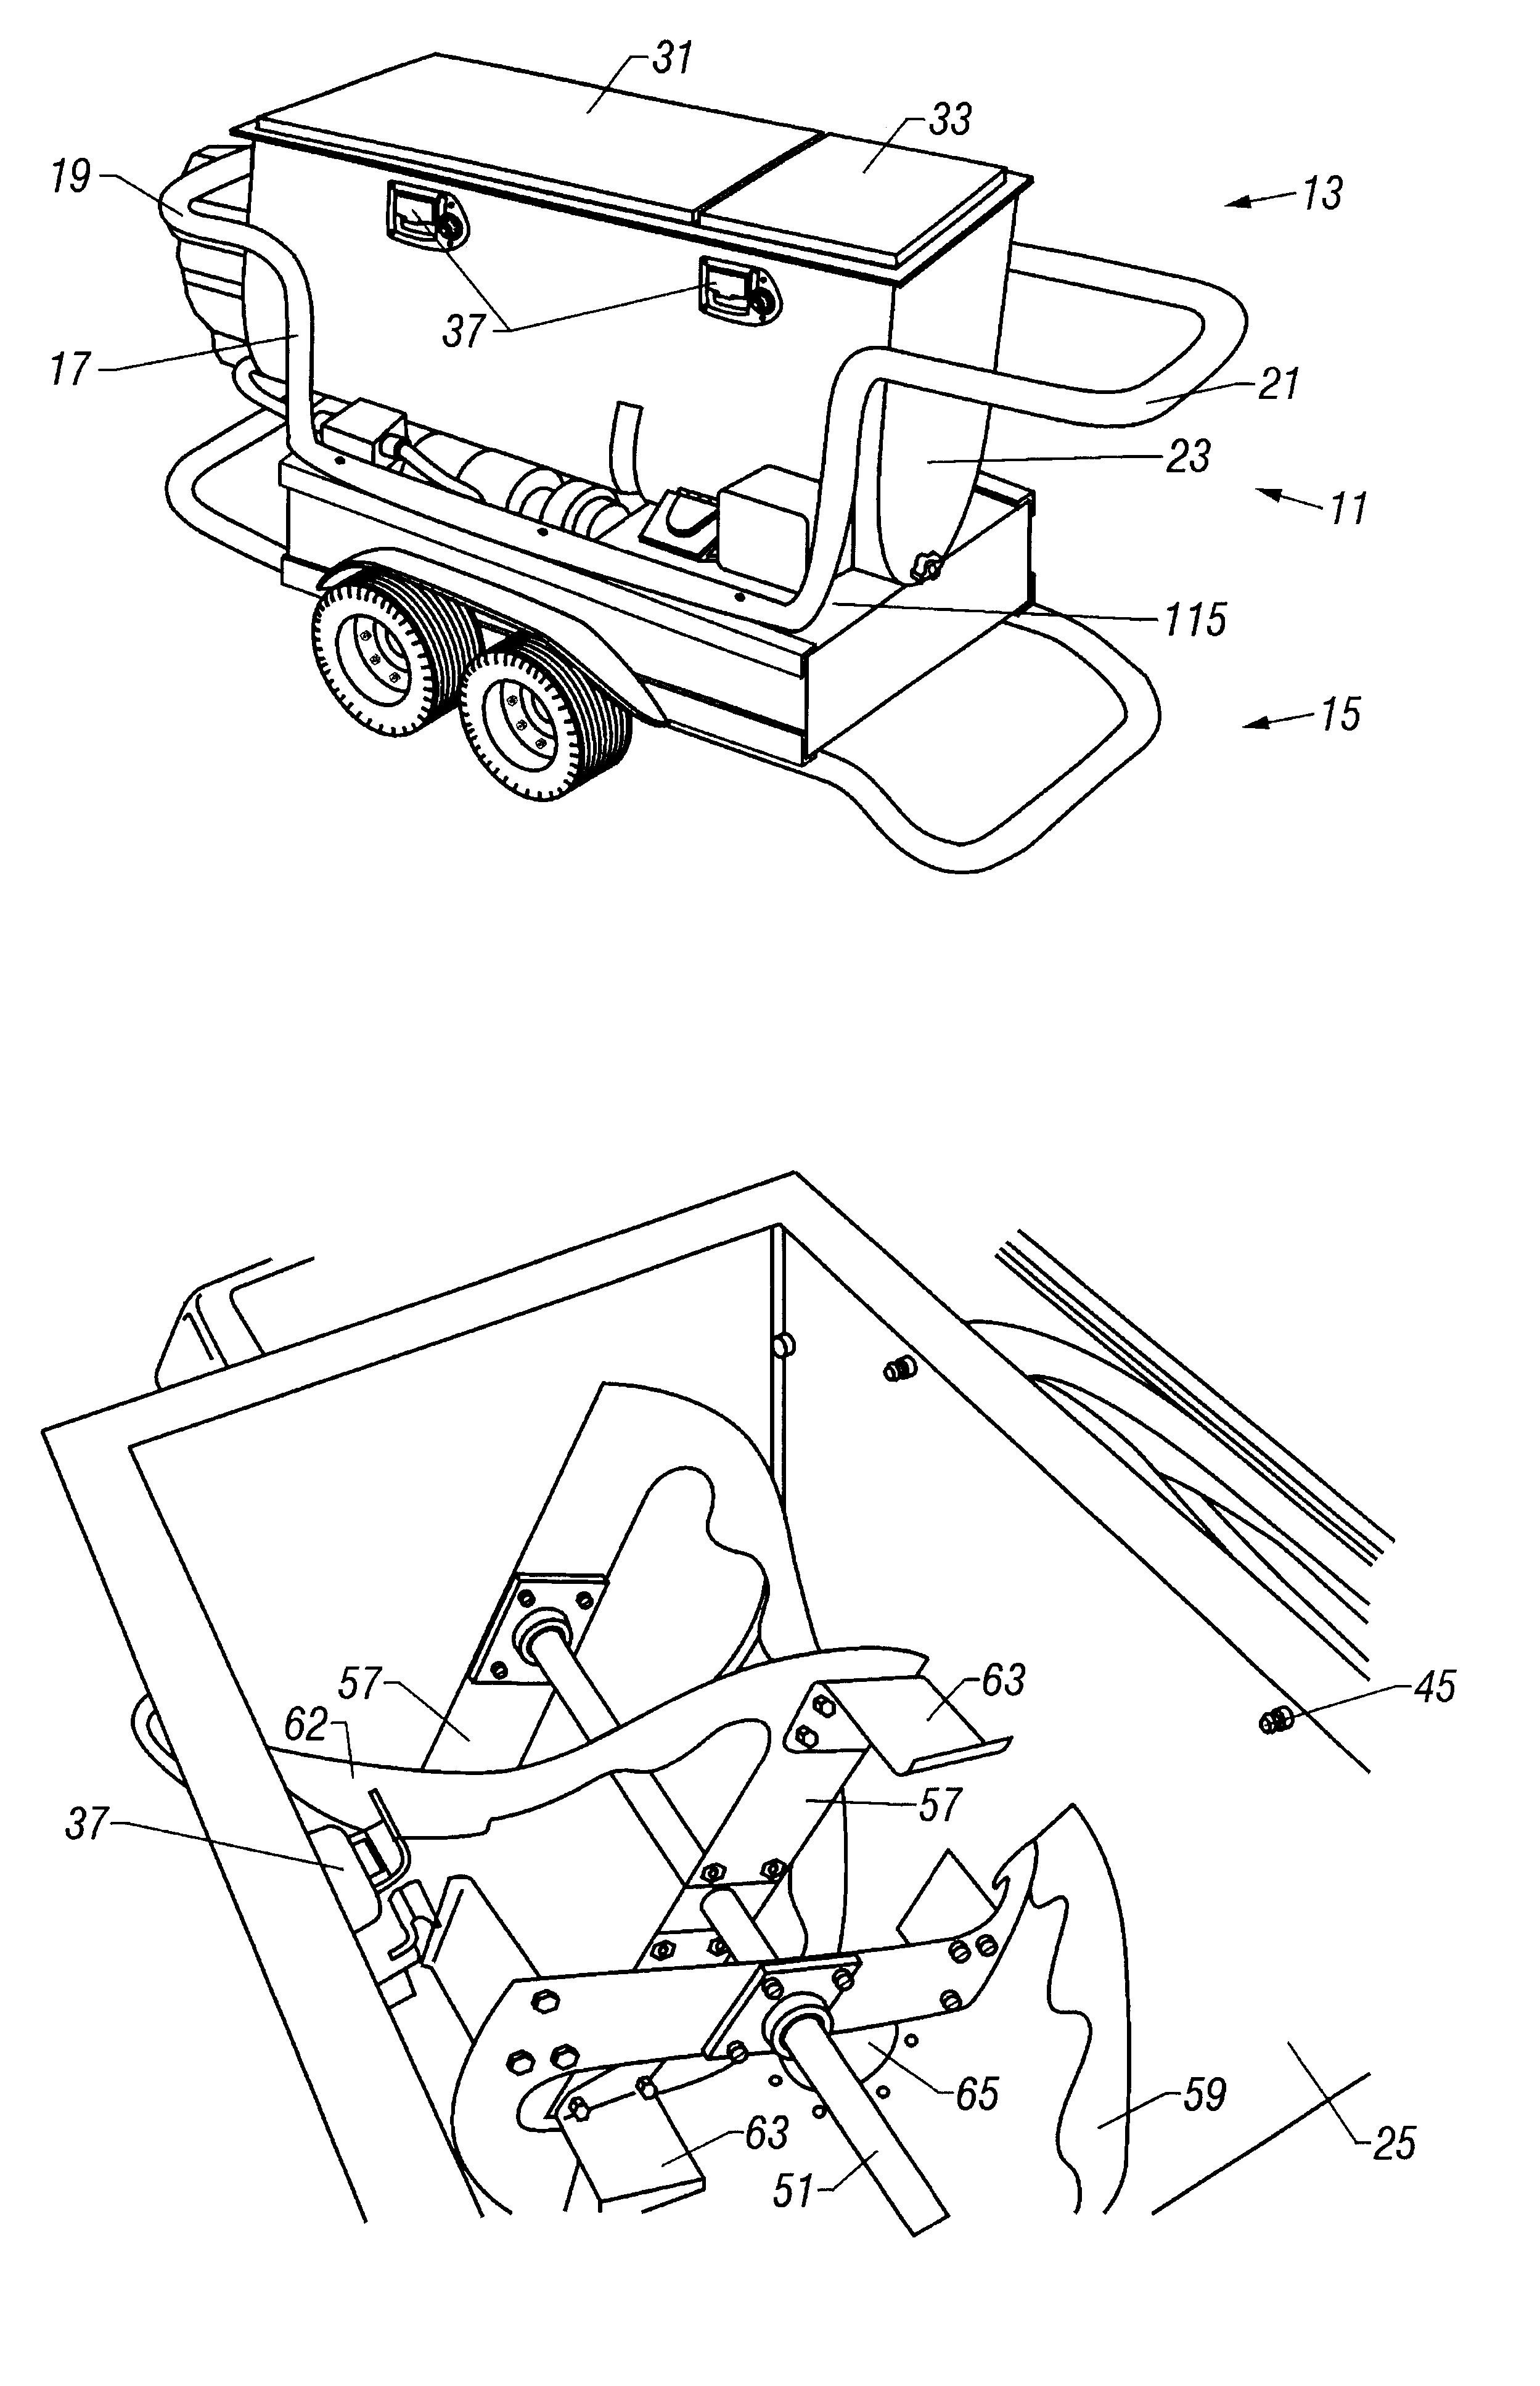 Apparatus for automated finishing of interior surfaces